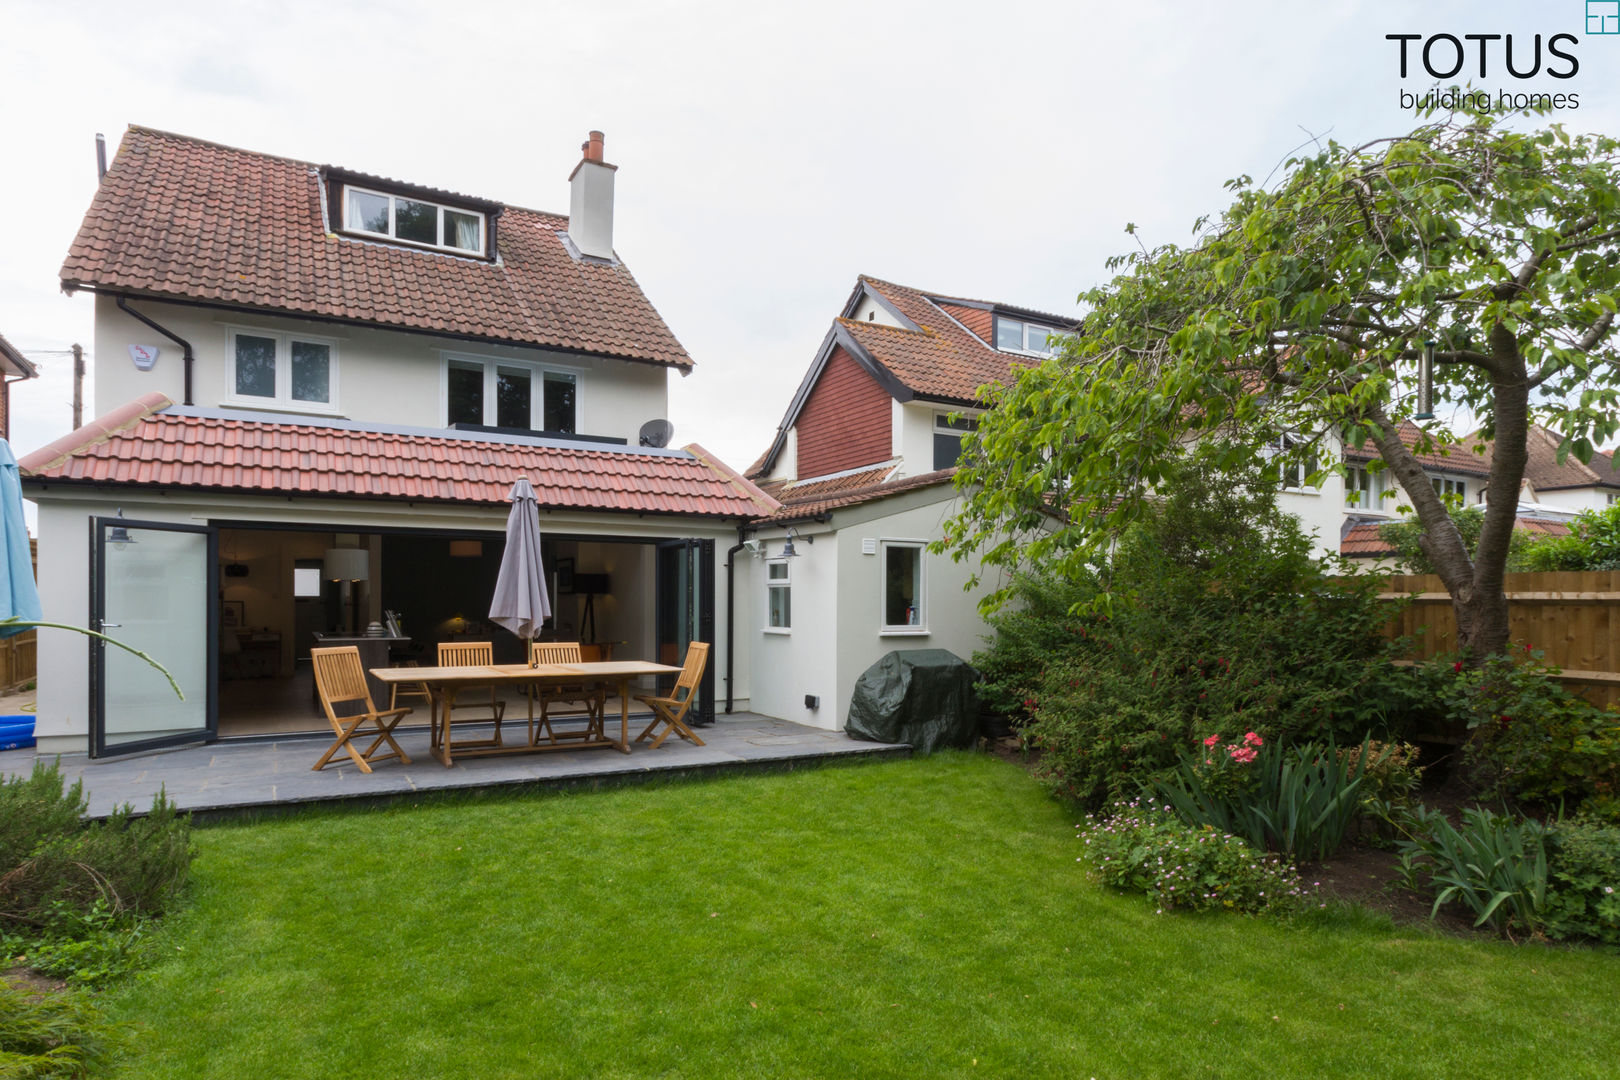 New life for a 1920s home - extension and full renovation, Thames Ditton, Surrey, TOTUS TOTUS Classic style houses